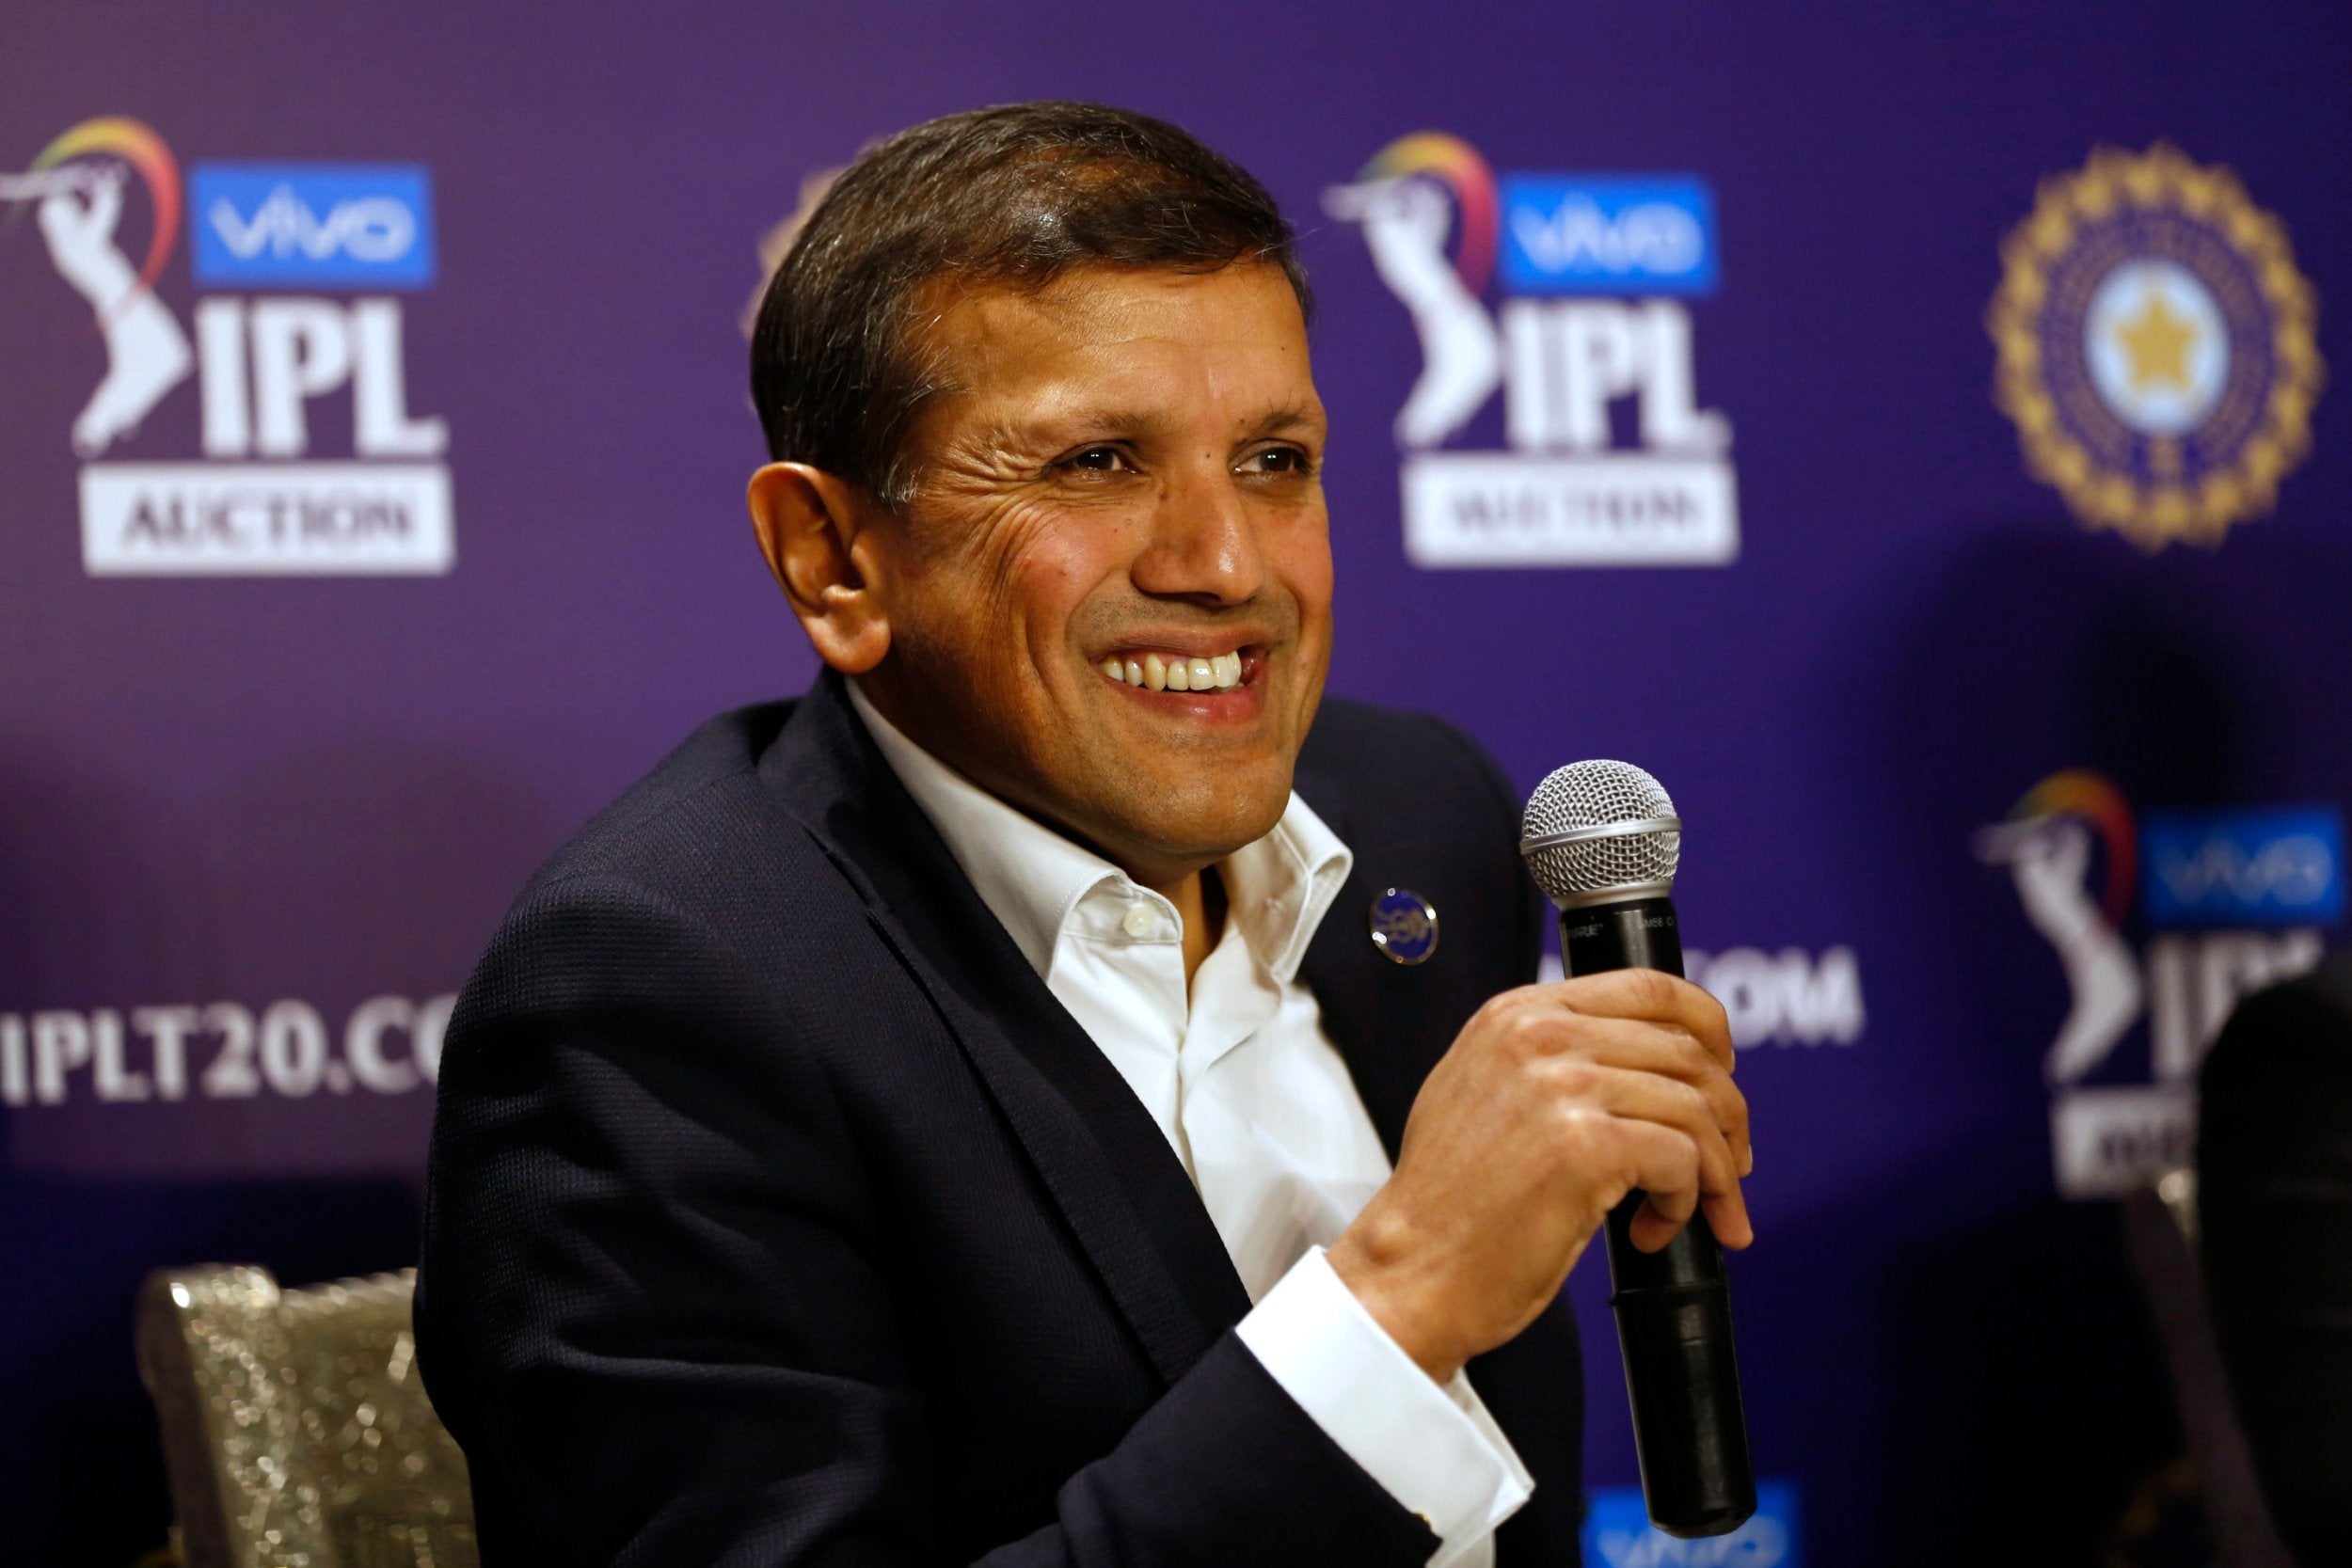 Co-owner of Rajasthan Royals Manoj Badale at the press conference for the IPL acution in Jaipur